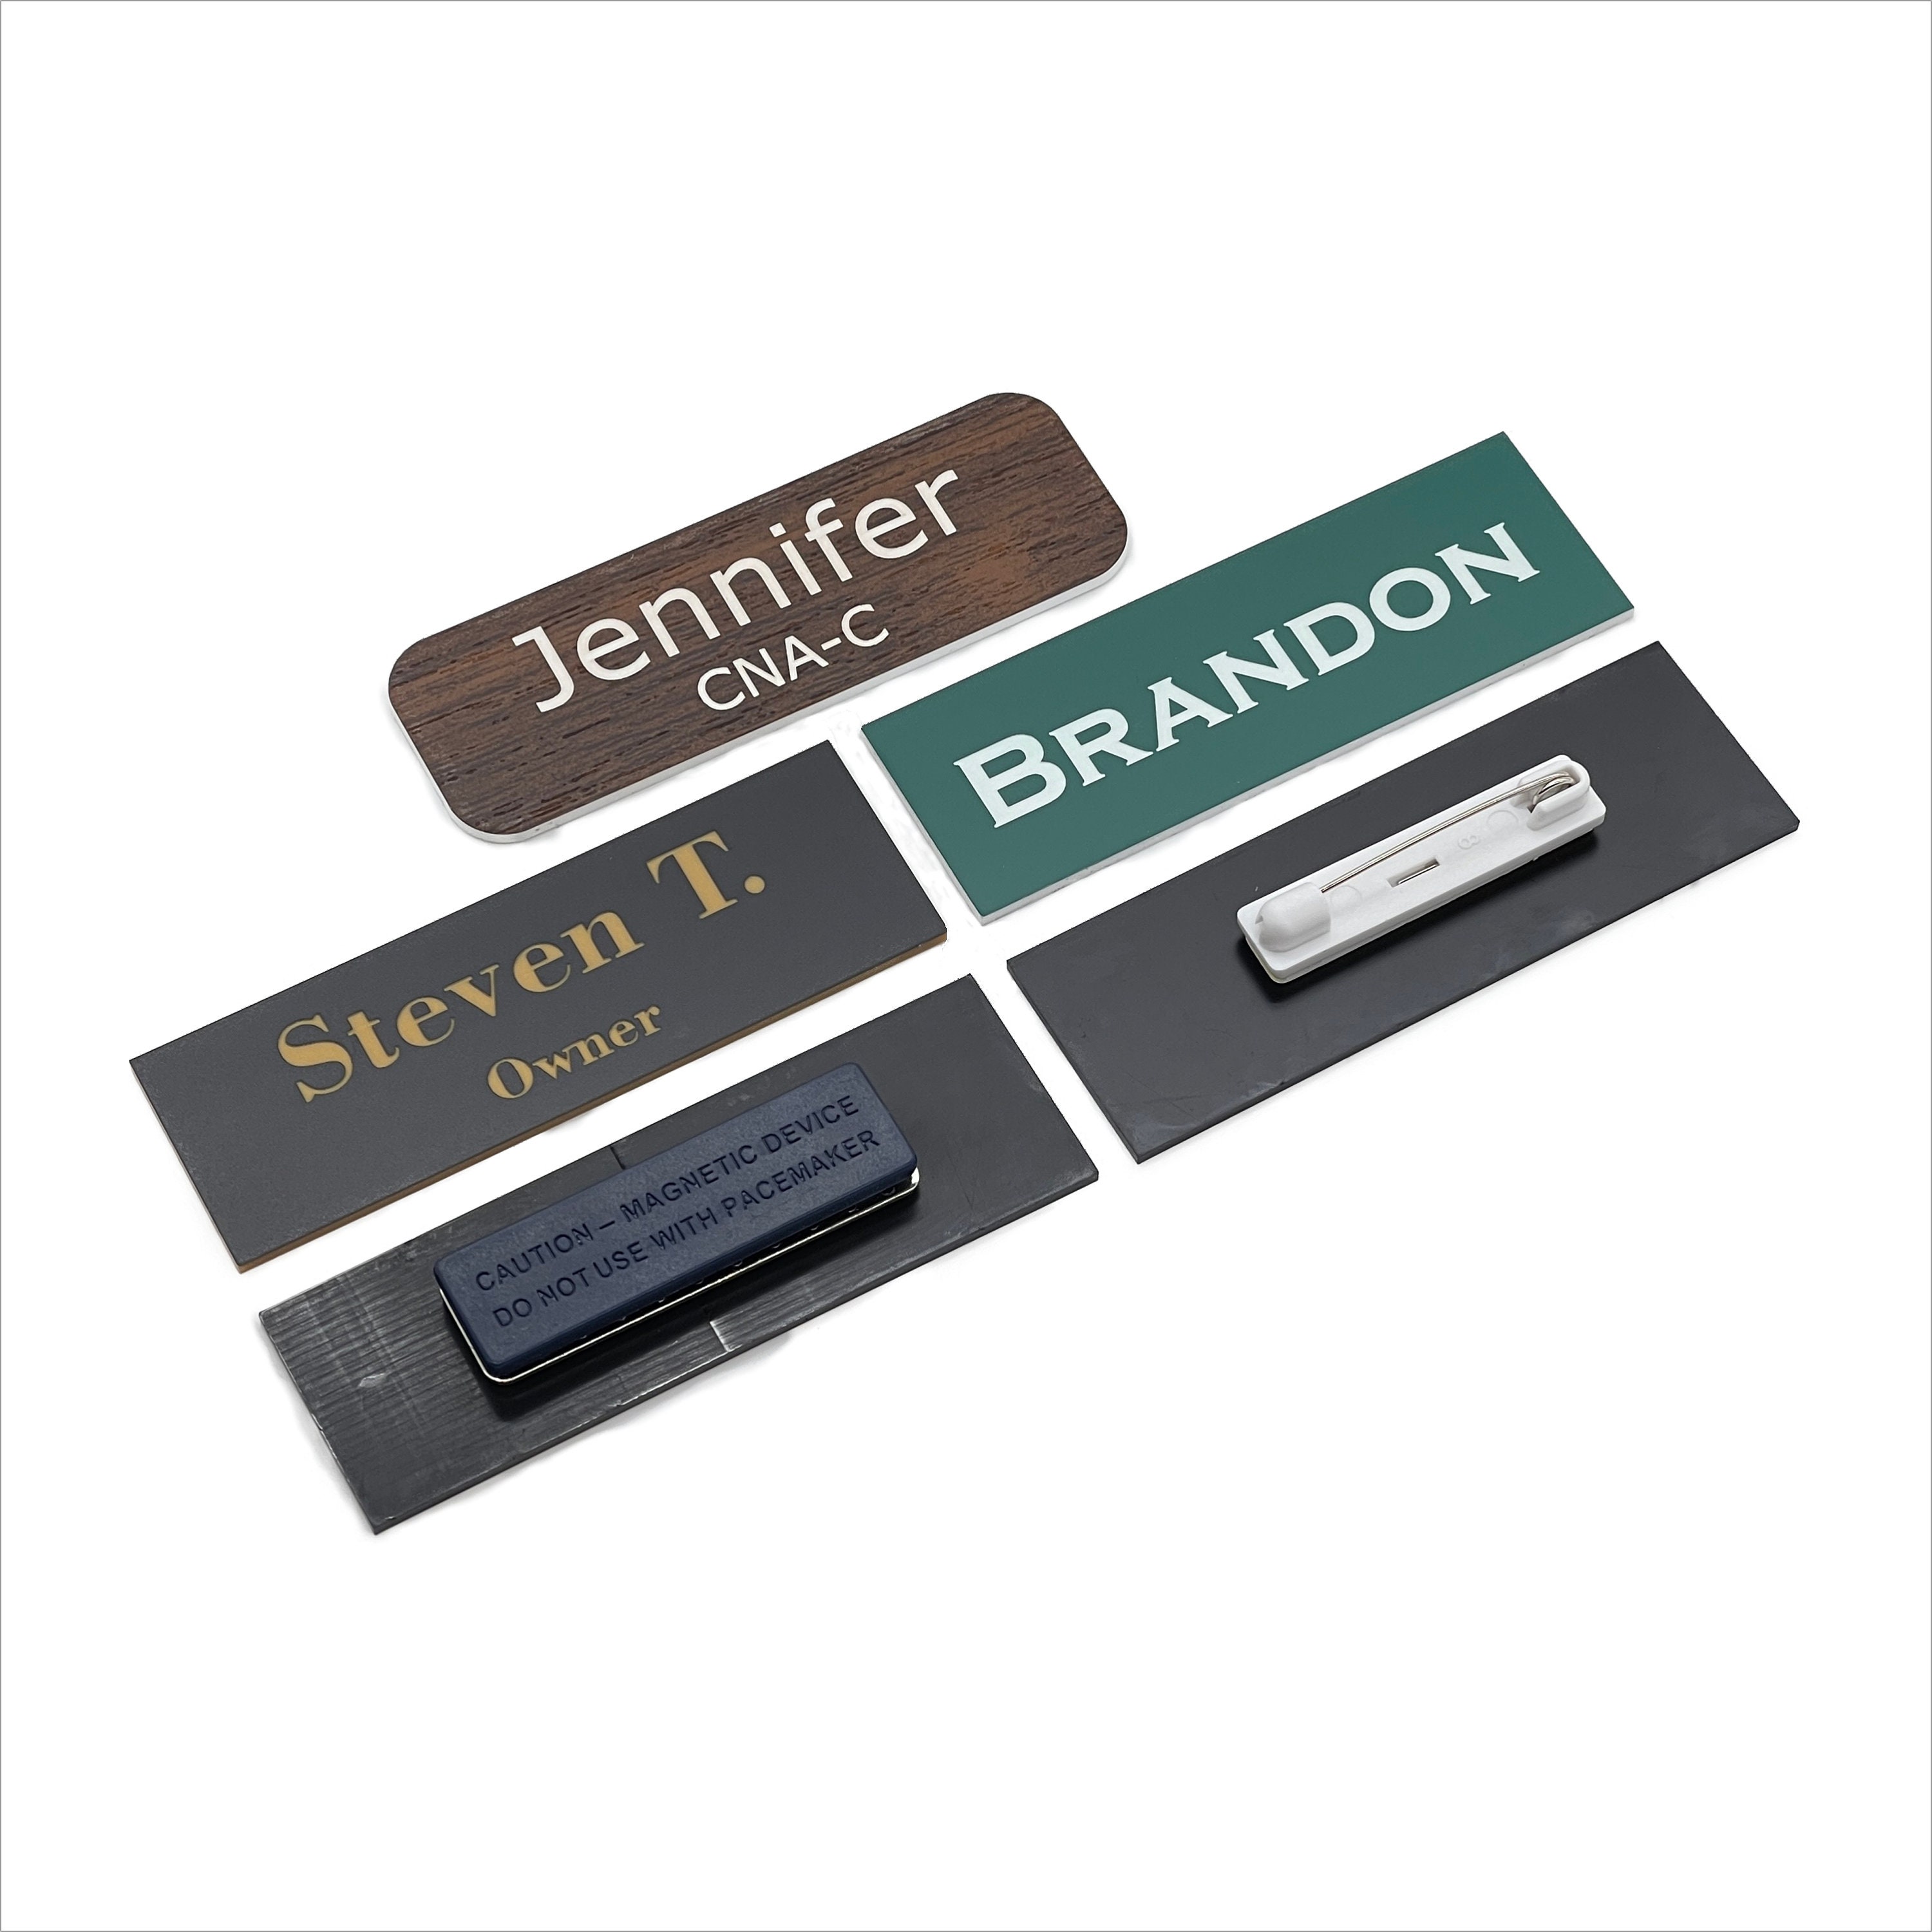 Custom Engraved Name Tag Badges – Personalized Identification with Pin or Magnetic Backing, 1 inch x 3 Inches, Silver/Black